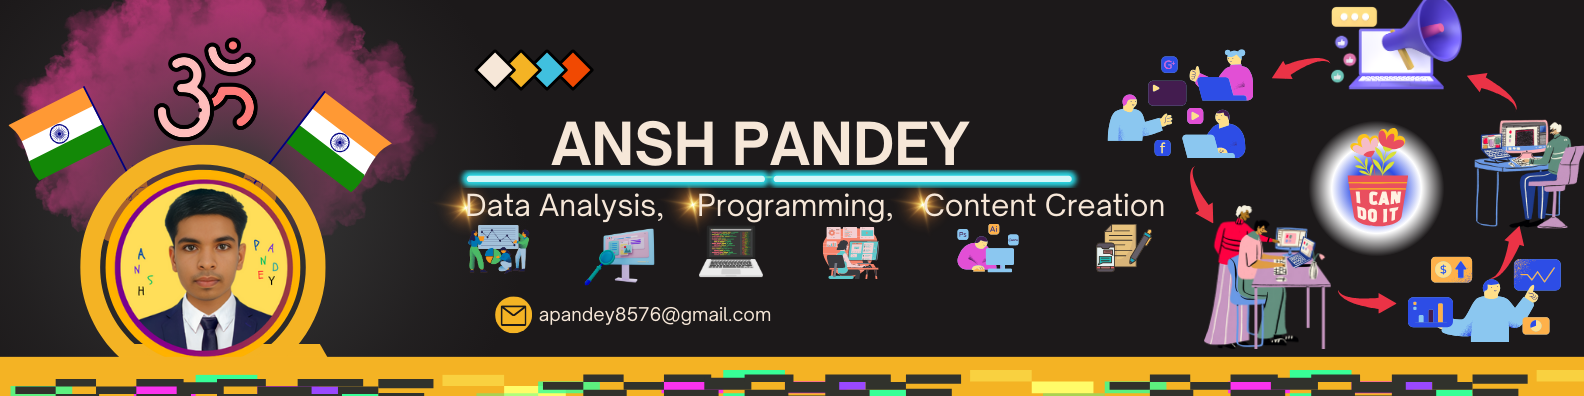 Ansh Pandey's cover image